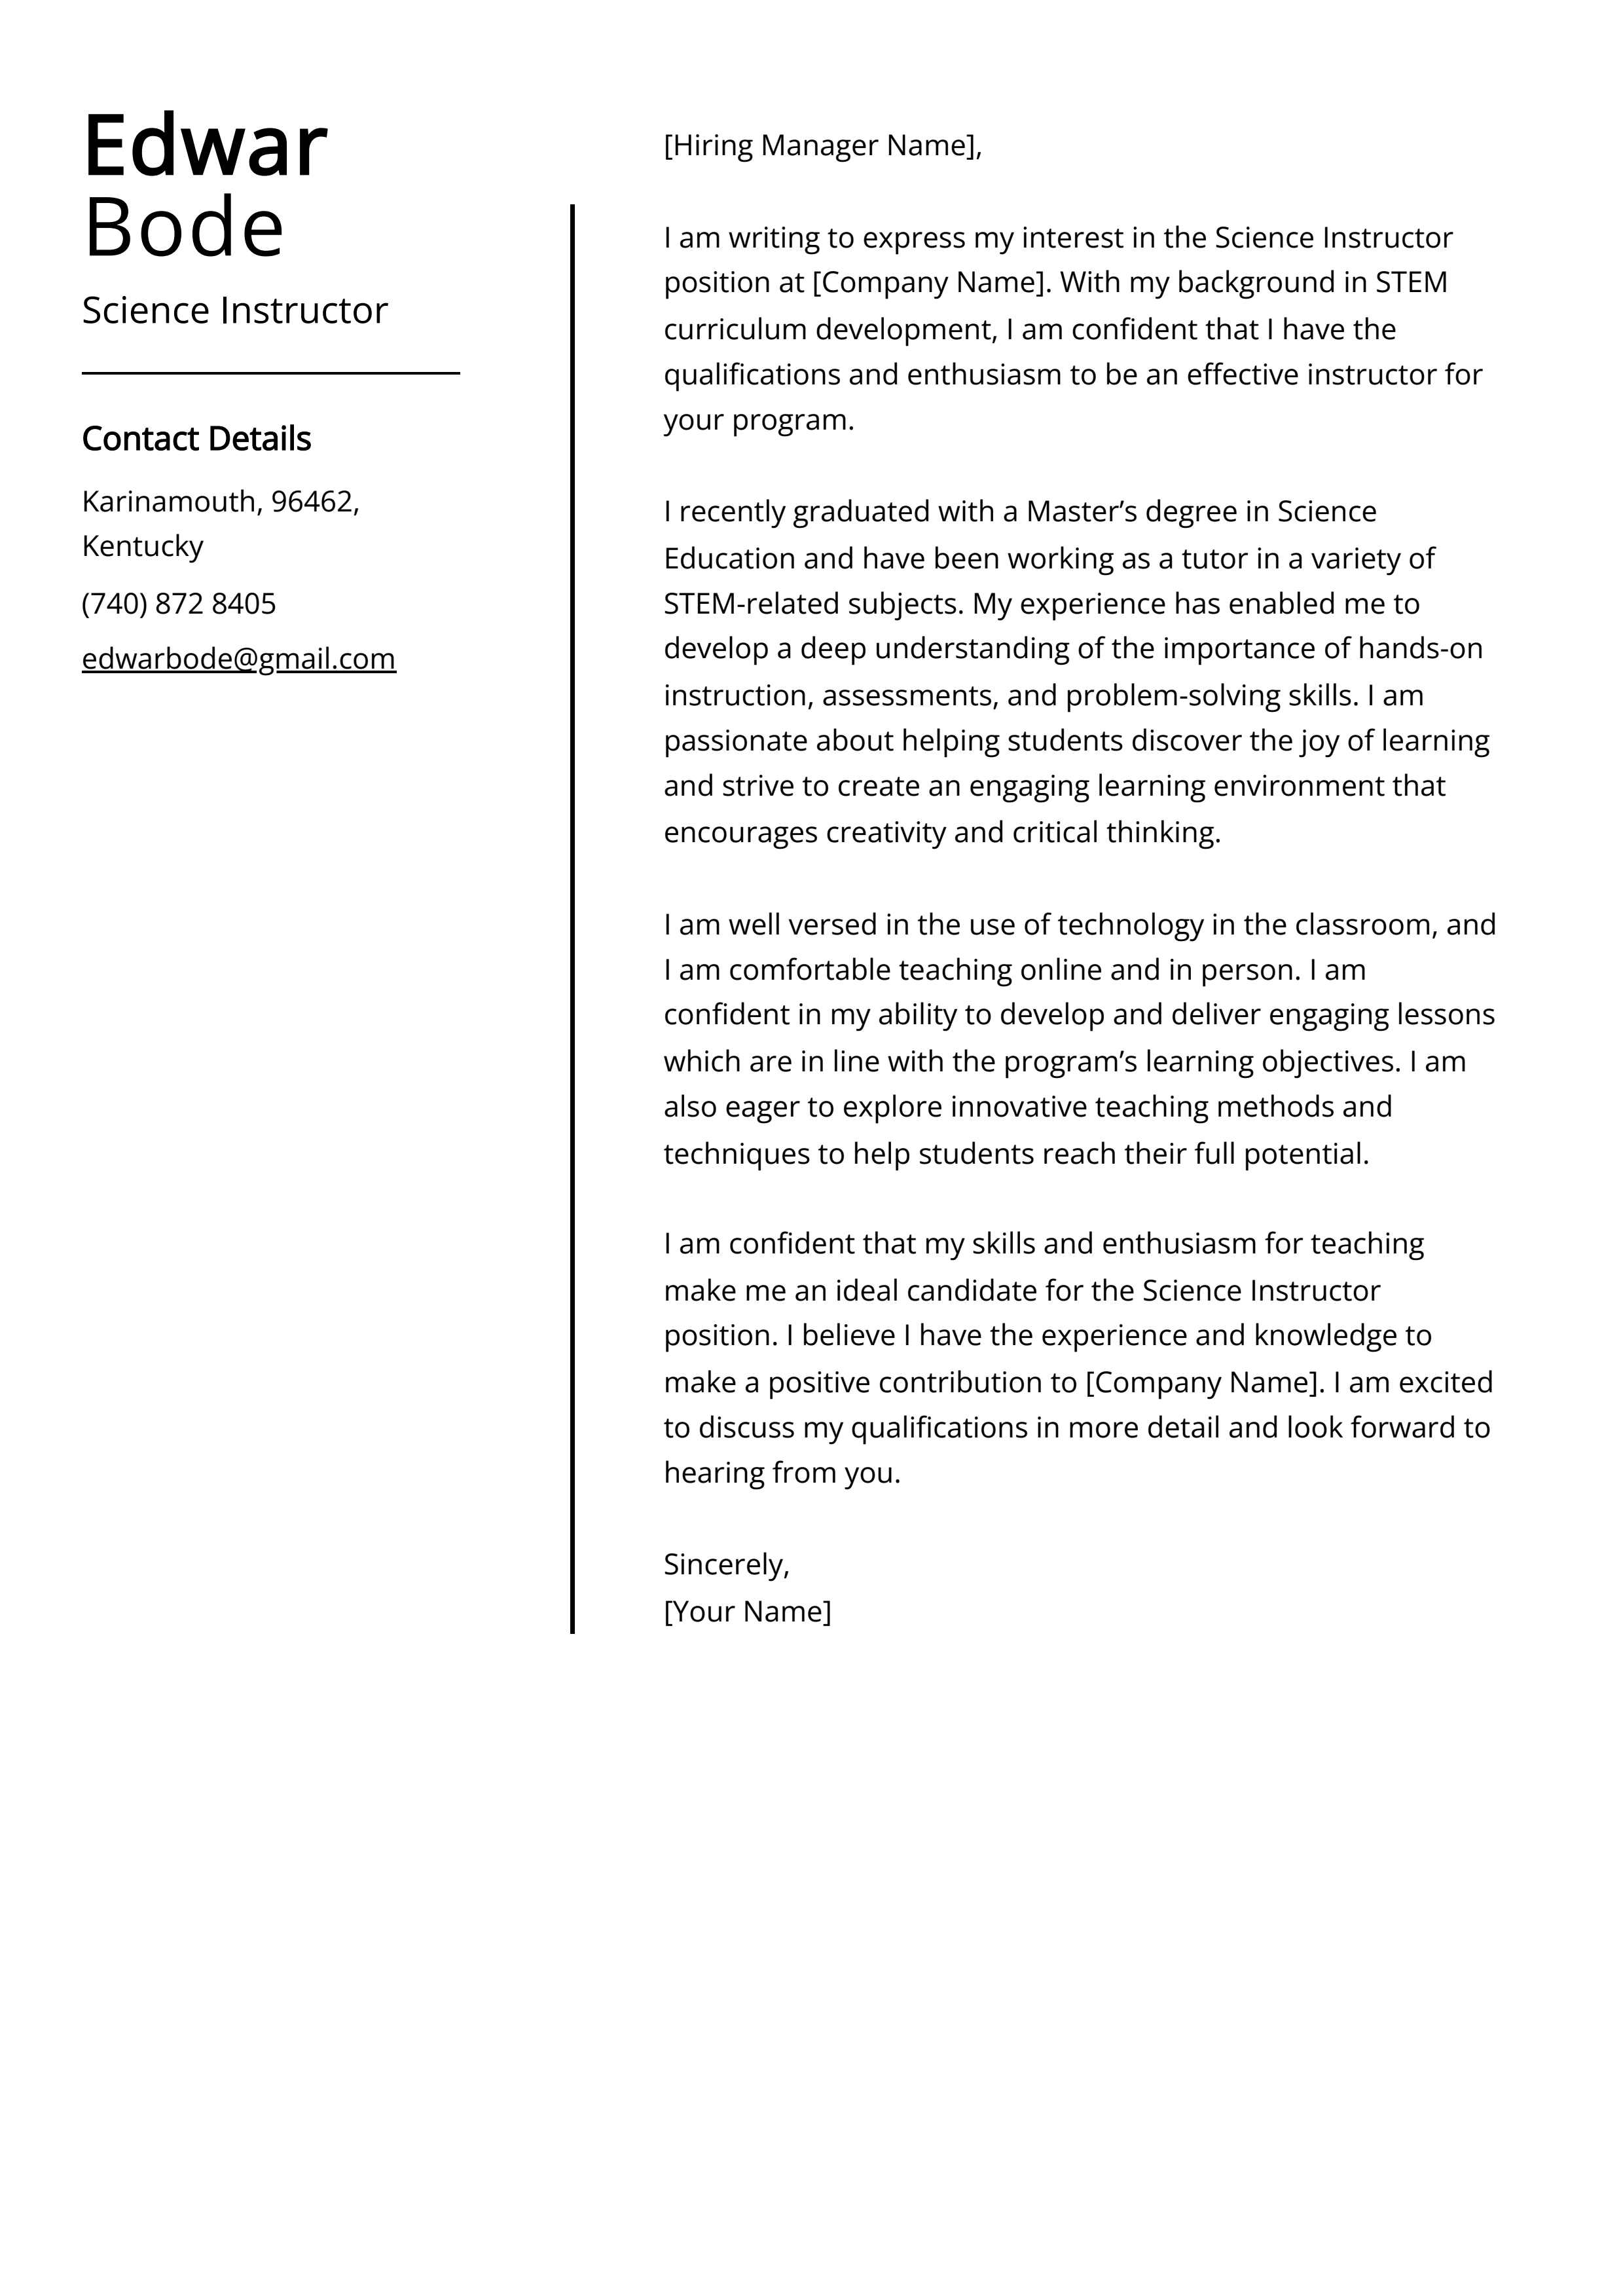 Science Instructor Cover Letter Example